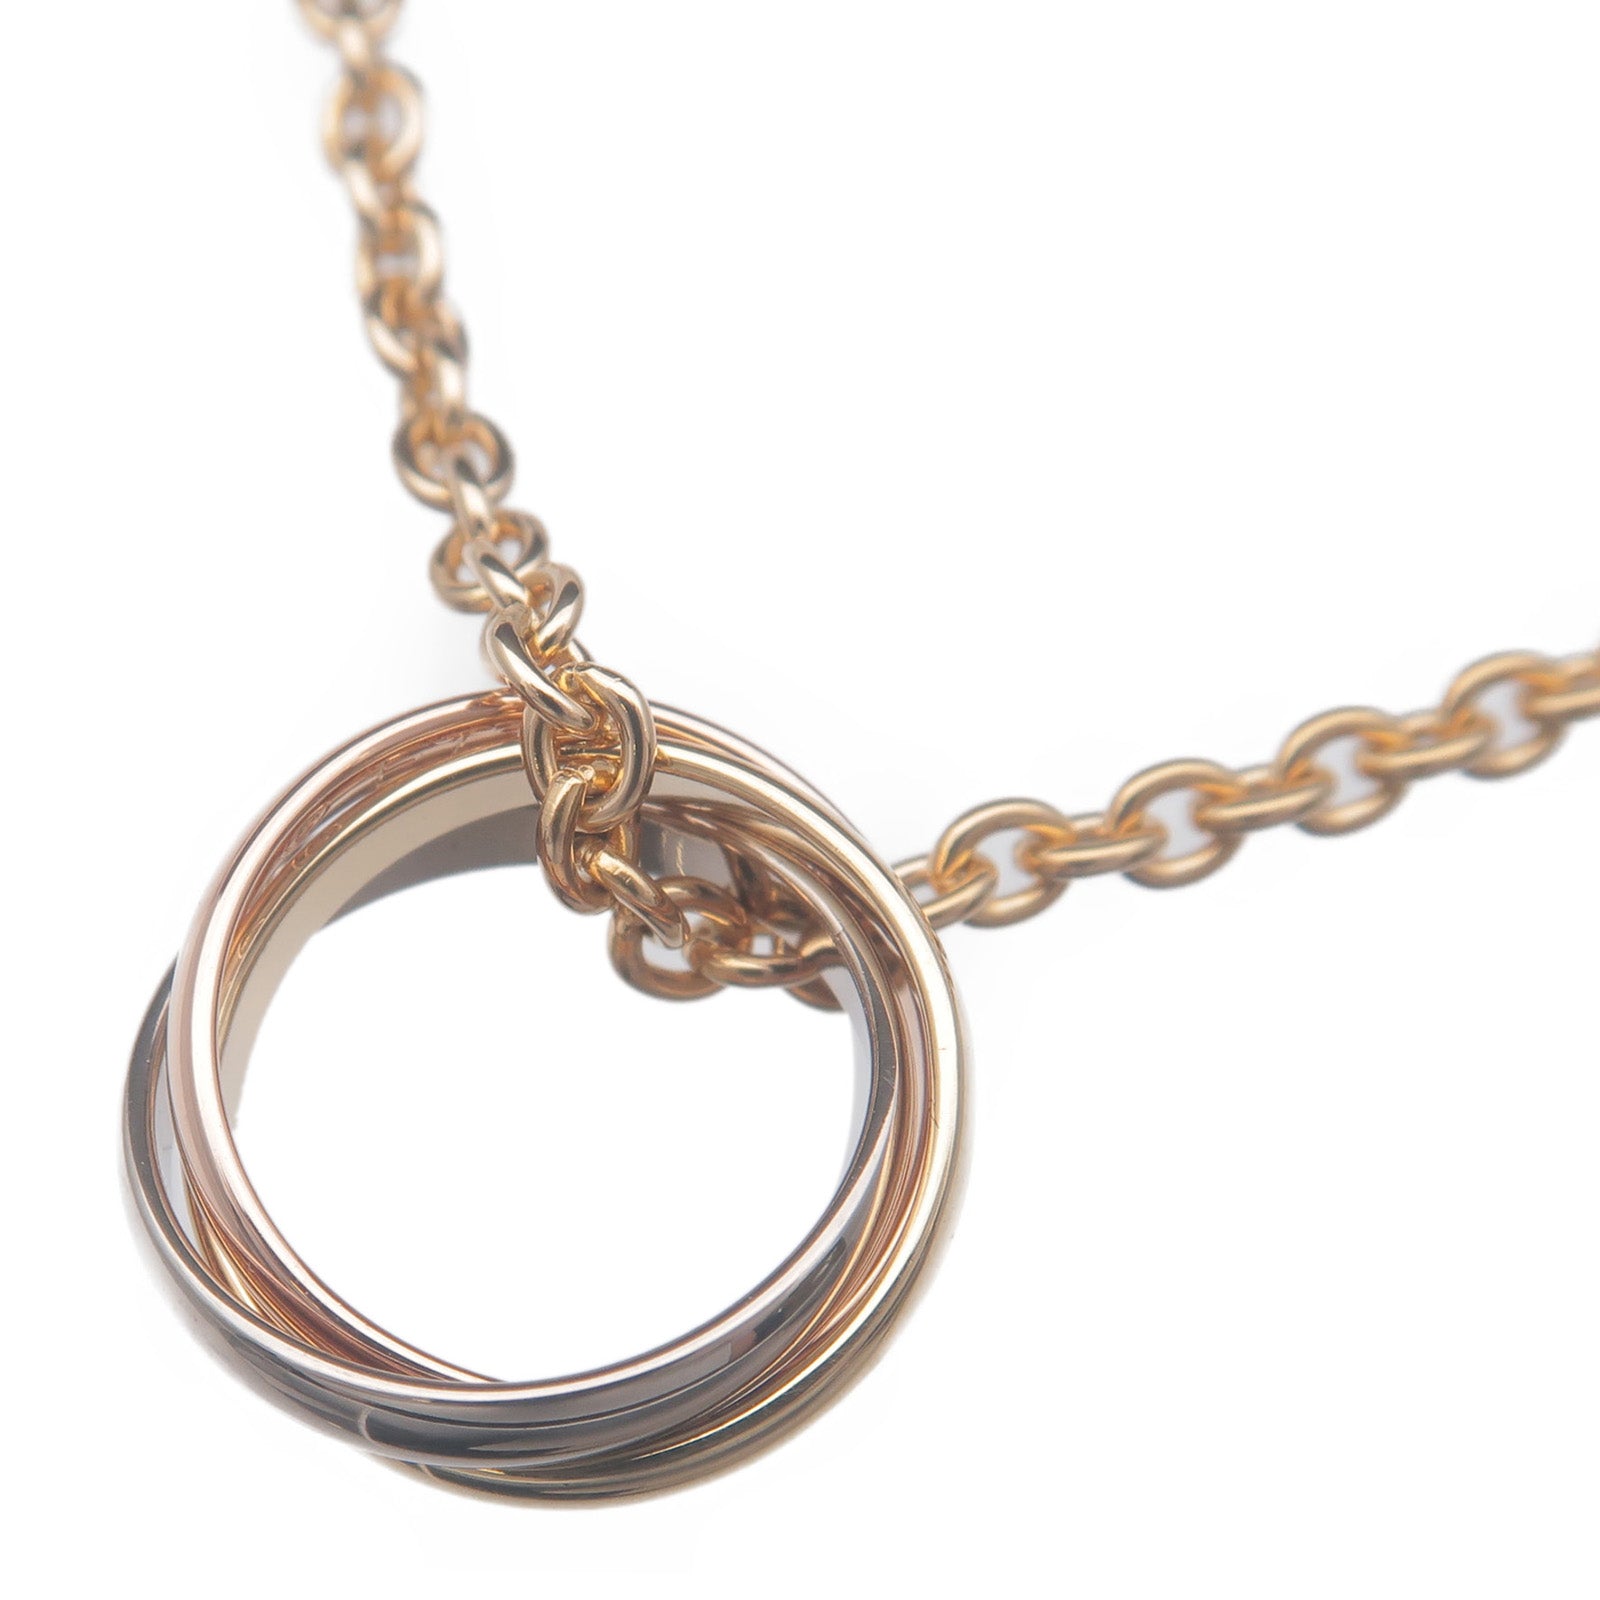 Cartier-Trinity-Necklace-K18-750-Yellow/White/Rose-Gold